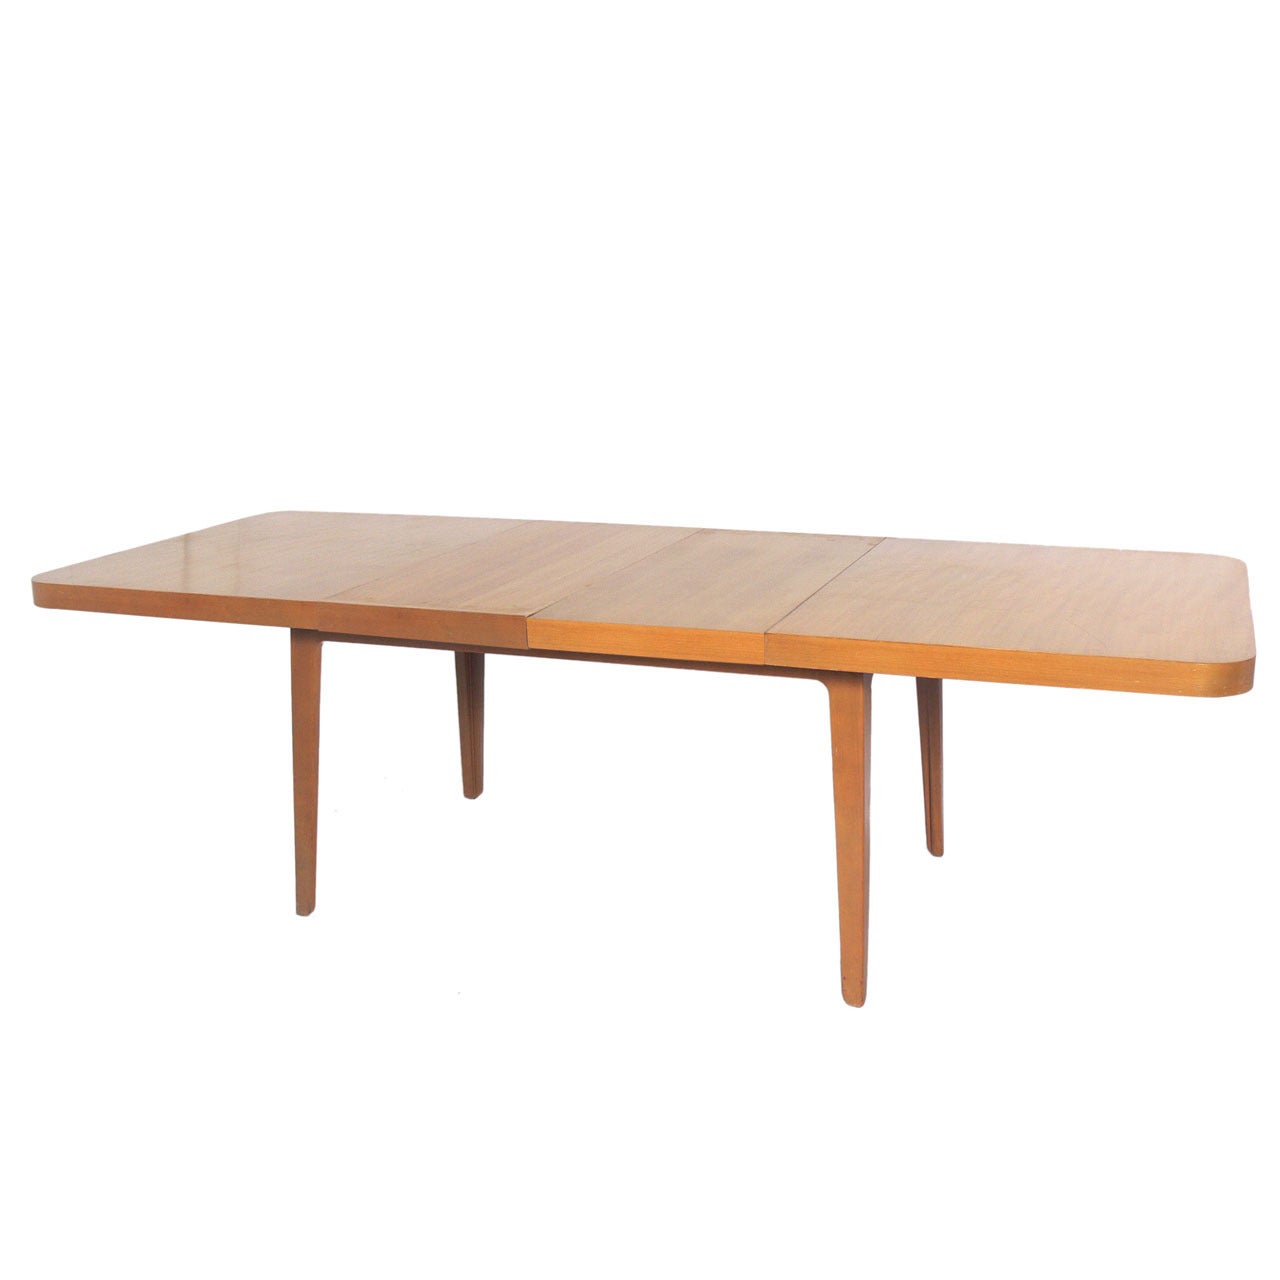 Modern Dining Table designed by Edward Wormley for Drexel